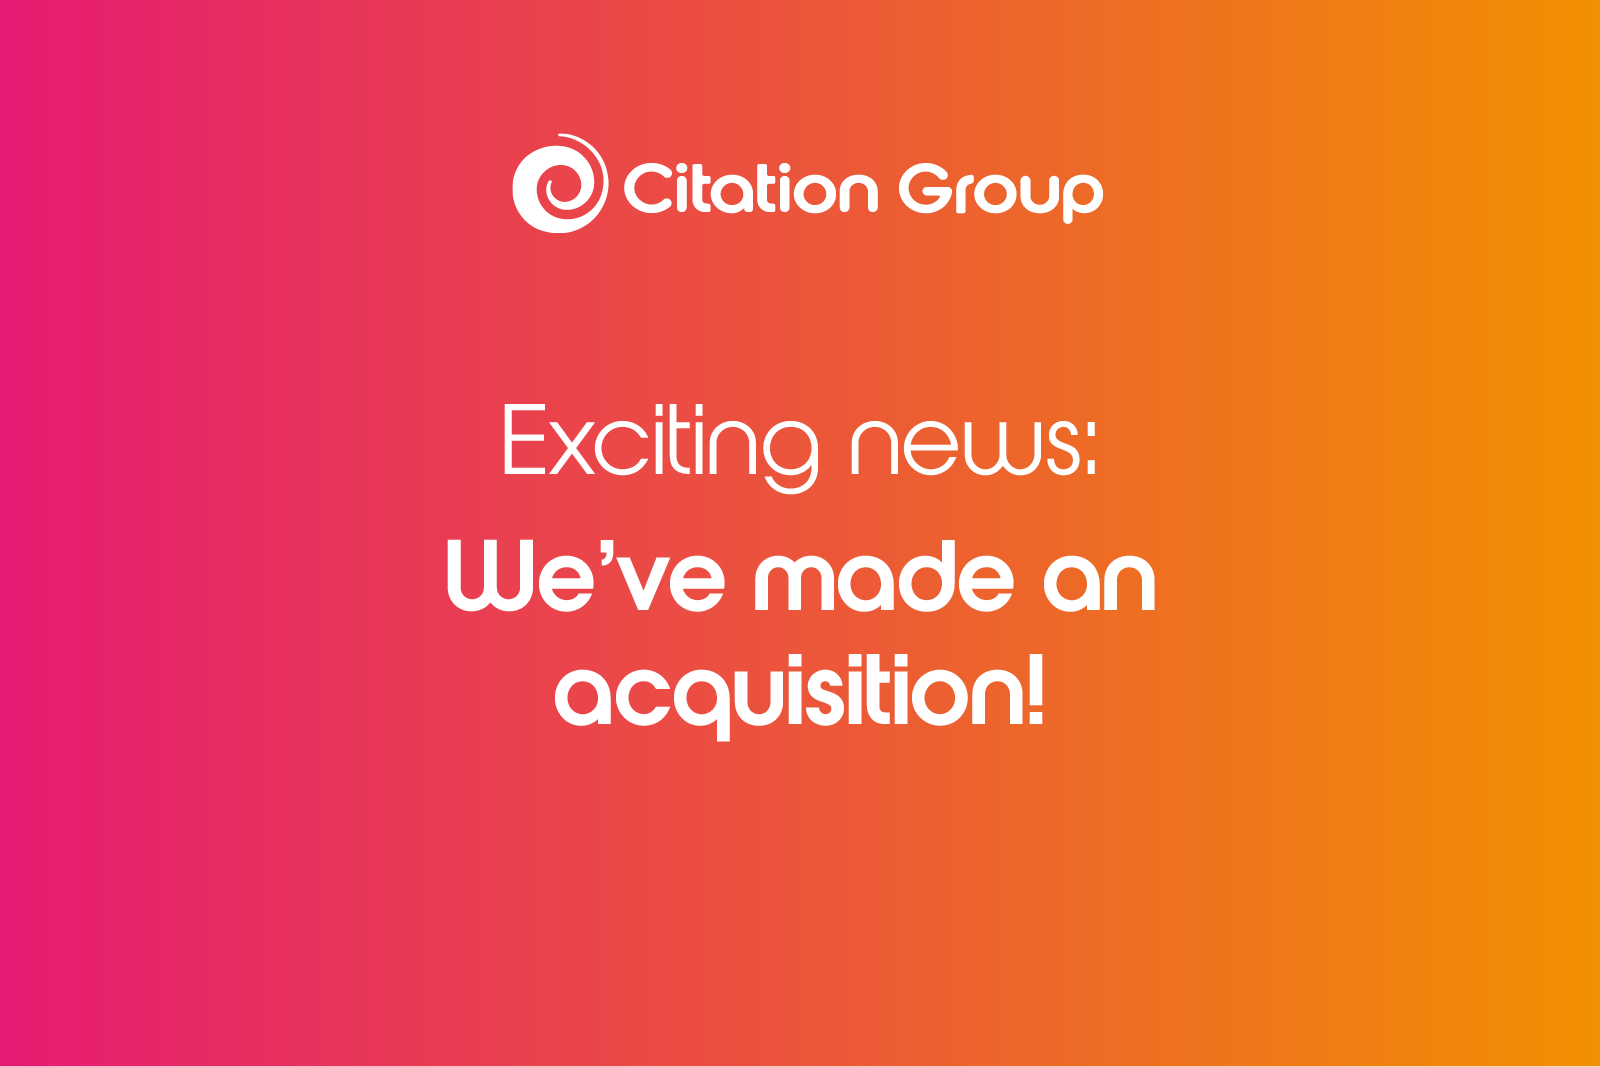 Citation Group completes successful acquisition of third certification business in Australia